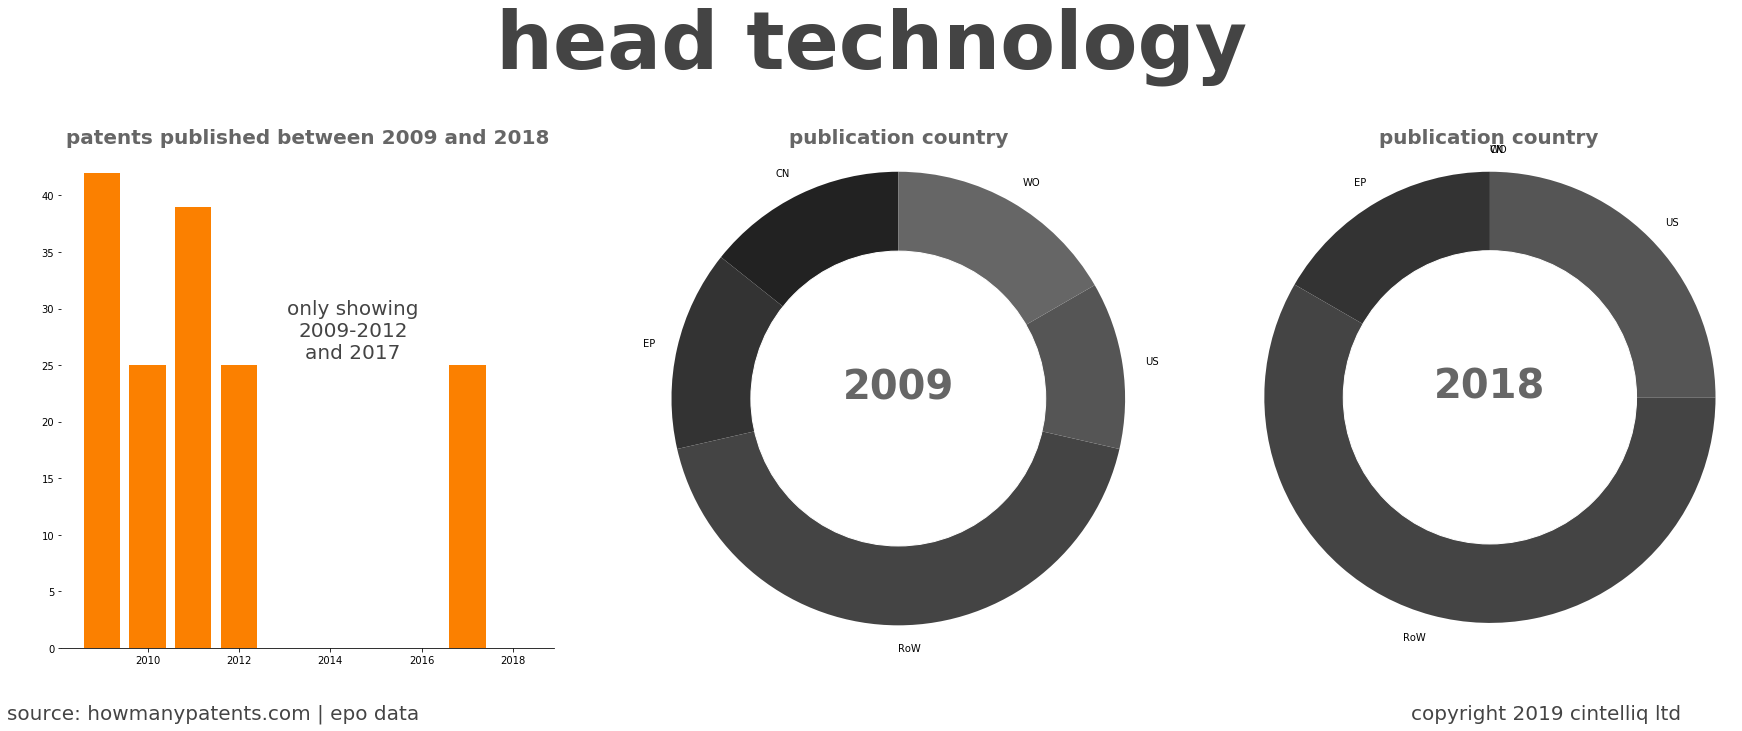 summary of patents for Head Technology